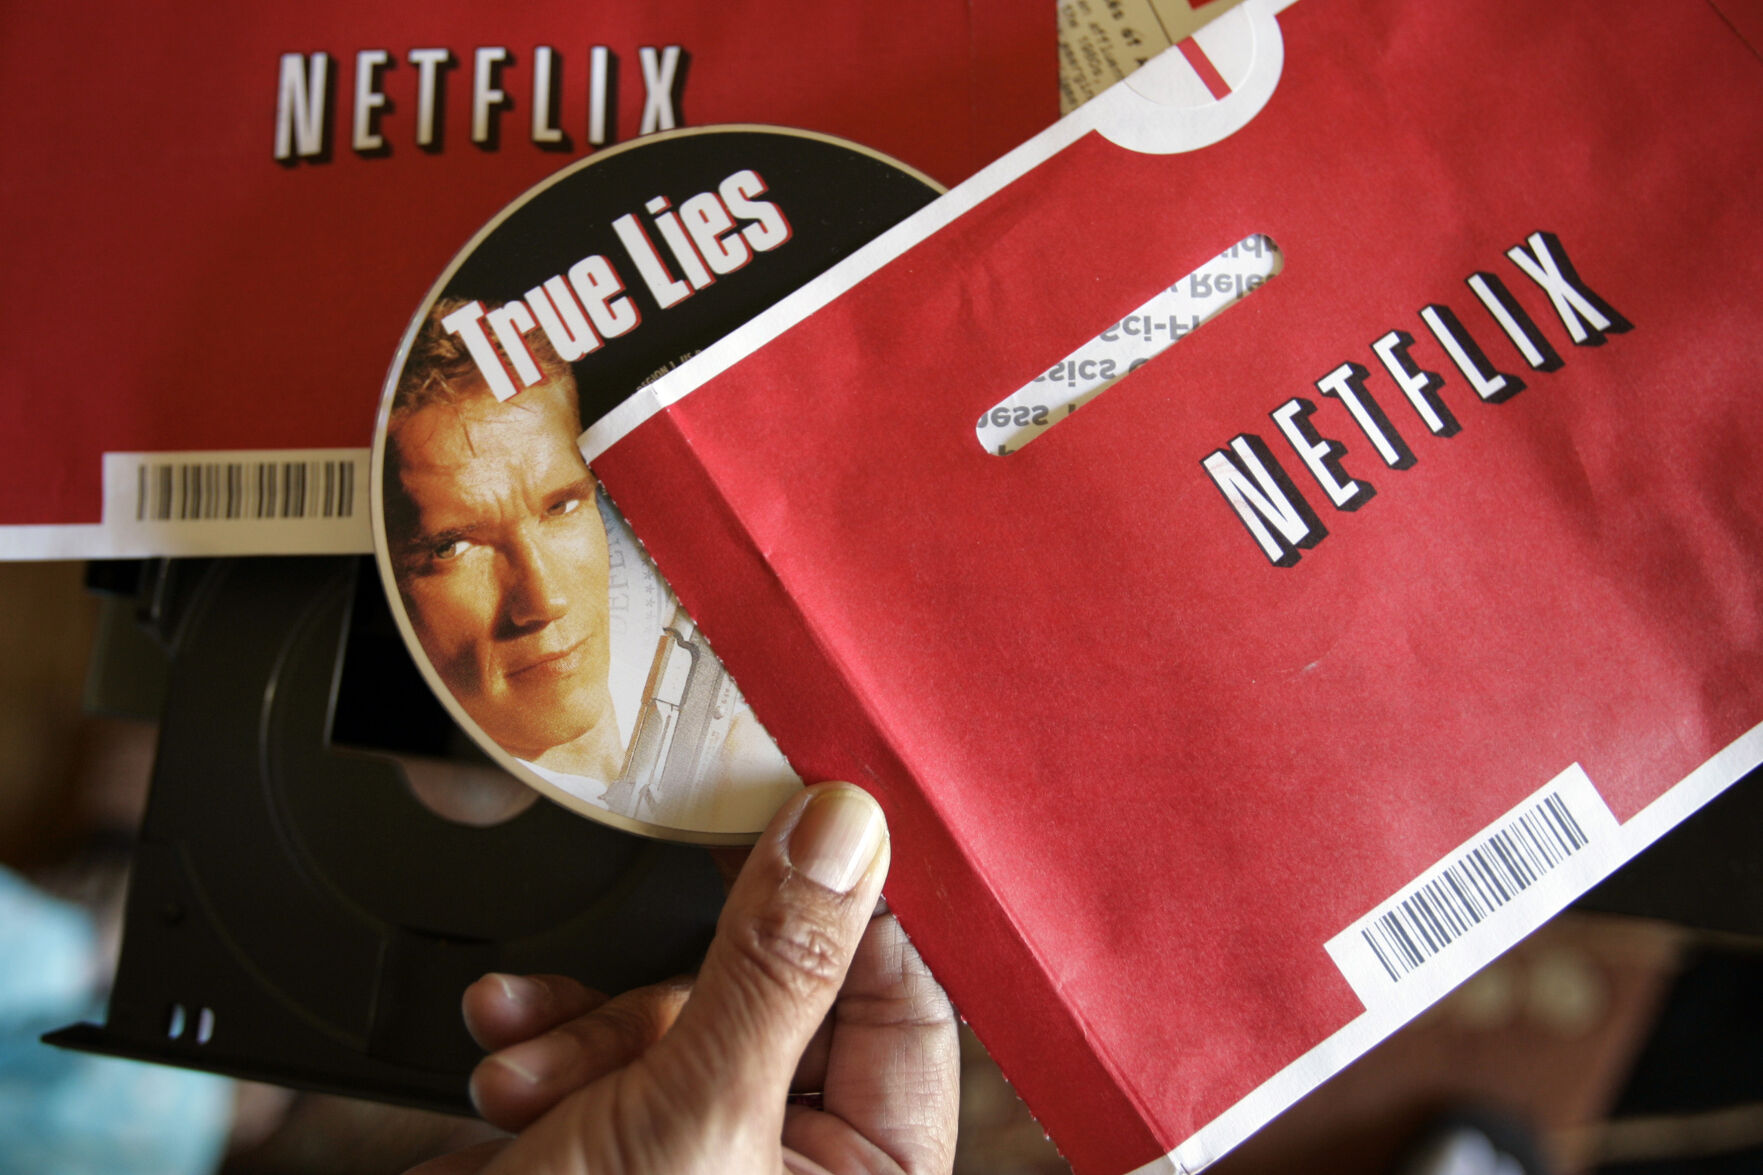 <p>File - Mei Michelson prepares to watch a Netflix DVD at her home in Palo Alto, Calif., on Oct. 22, 2007. The Netflix DVD-by-service will mail out its final discs Friday from its five remaining distribution centers, ending its 25-year history. (AP Photo/Paul Sakuma, File)</p>   PHOTO CREDIT: Paul Sakuma 